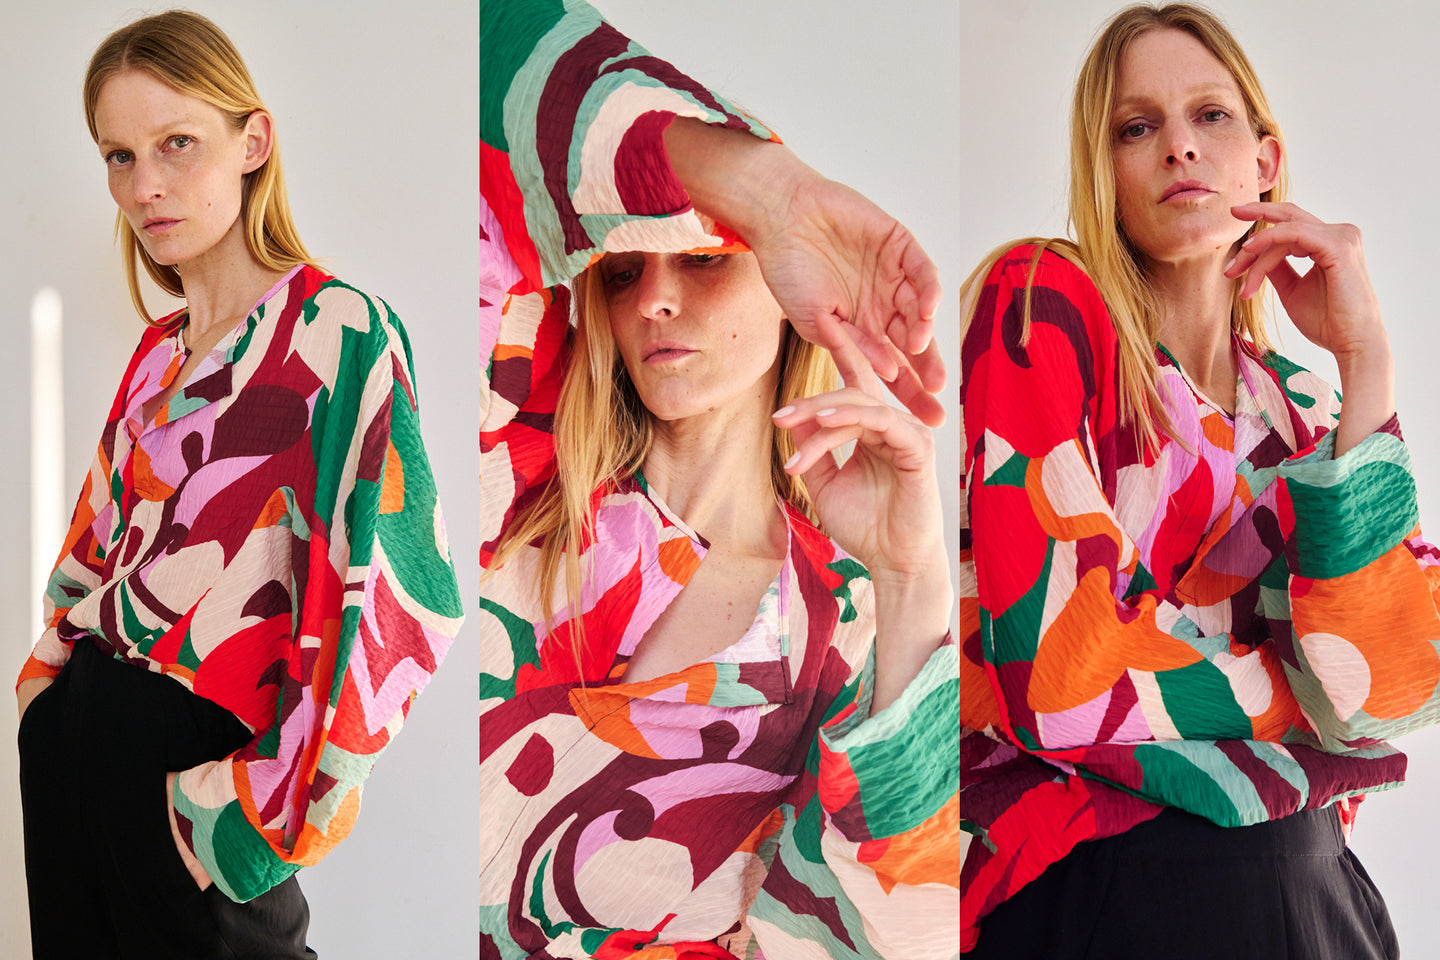 A woman with long blond hair poses in three different positions, wearing a colorful abstract patterned blouse and black pants, stands against a plain background with a neutral expression. The Long-Sleeved Akeo Shirt in Pop Paisley Print by Zero + Maria Cornejo features vibrant reds, greens, pinks, and oranges.